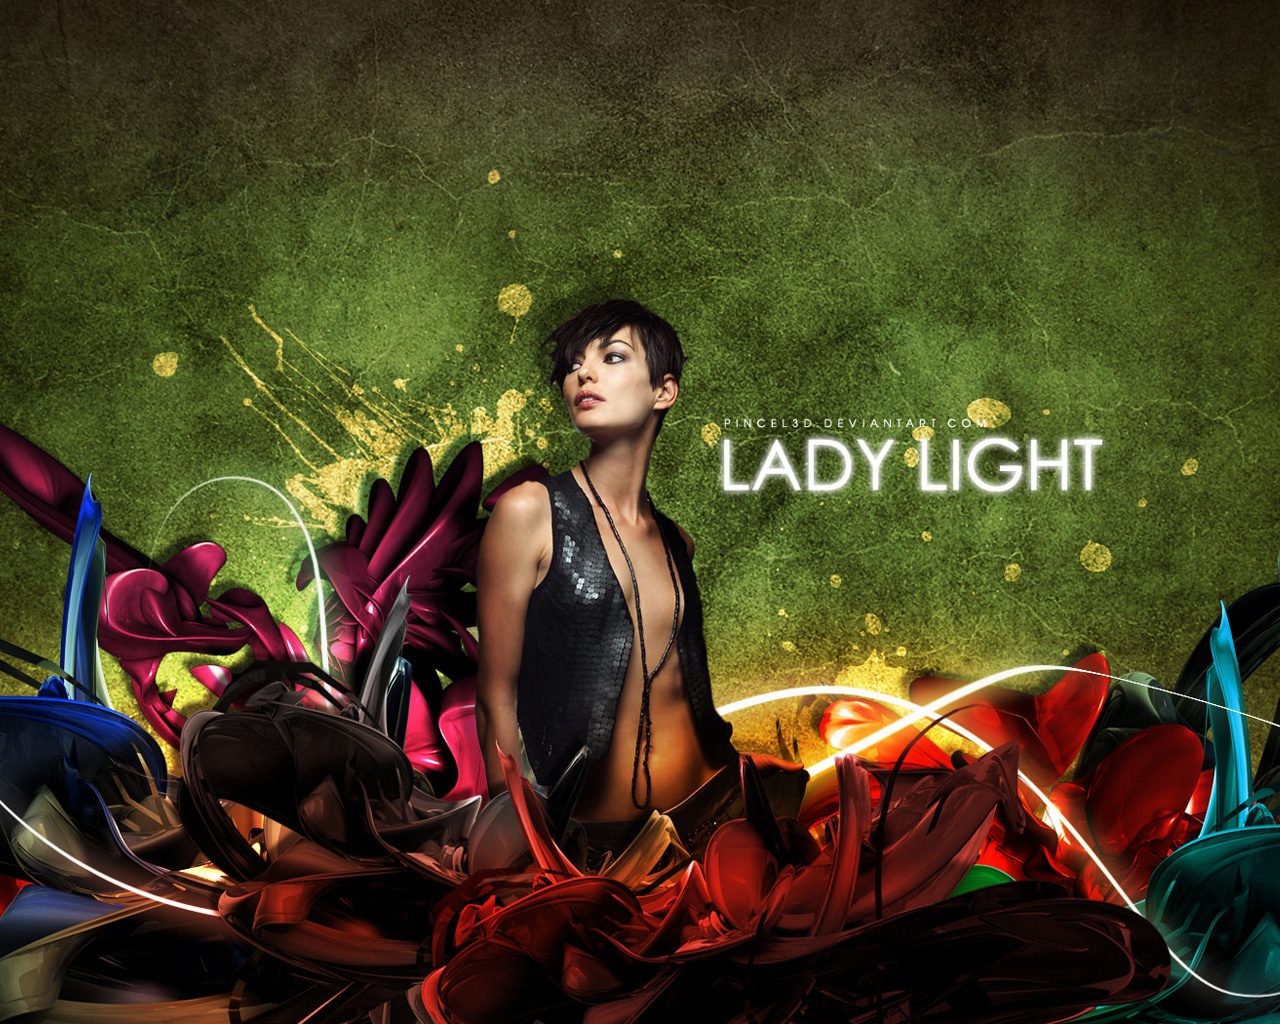 Lady light HD and Wide Wallpapers